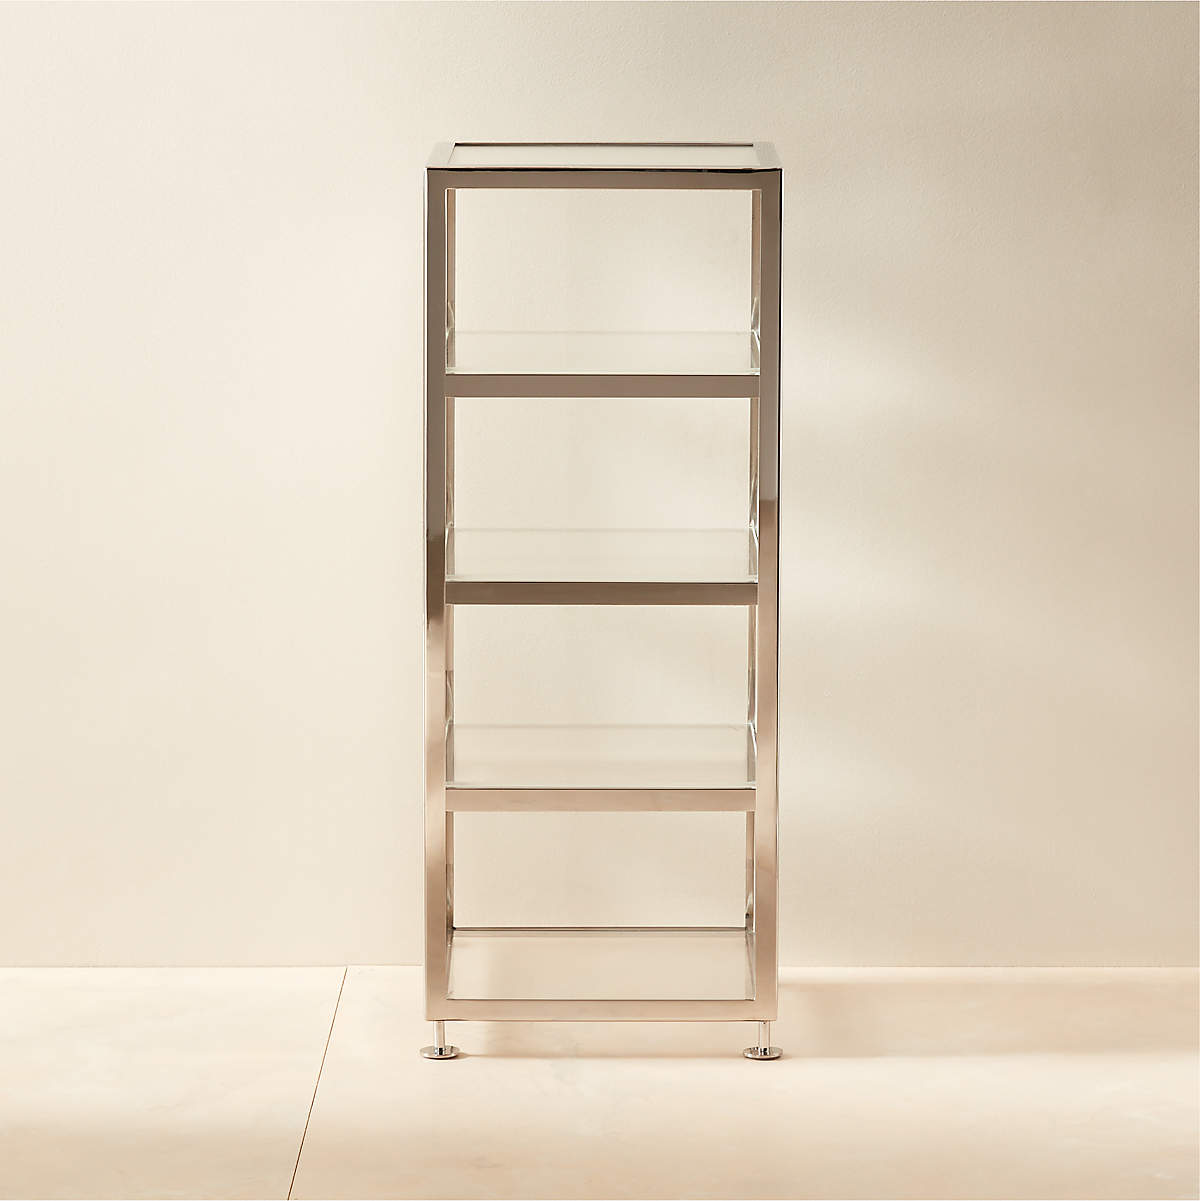 Athena Polished Stainless Steel Storage Tower | CB2